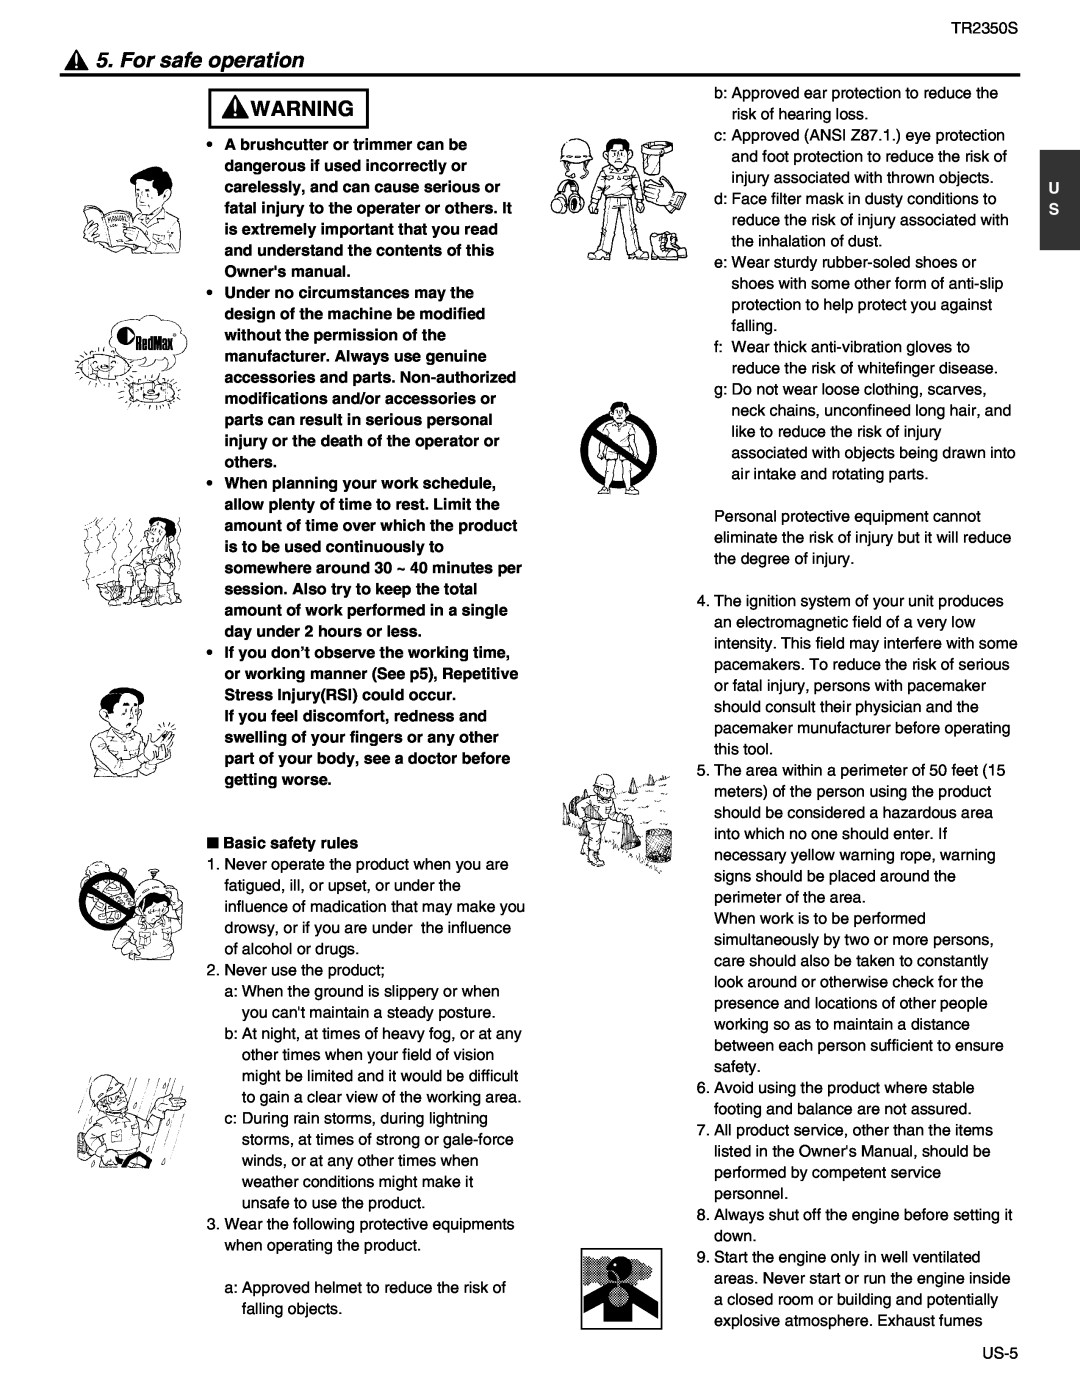 RedMax TR2350S manual For safe operation 